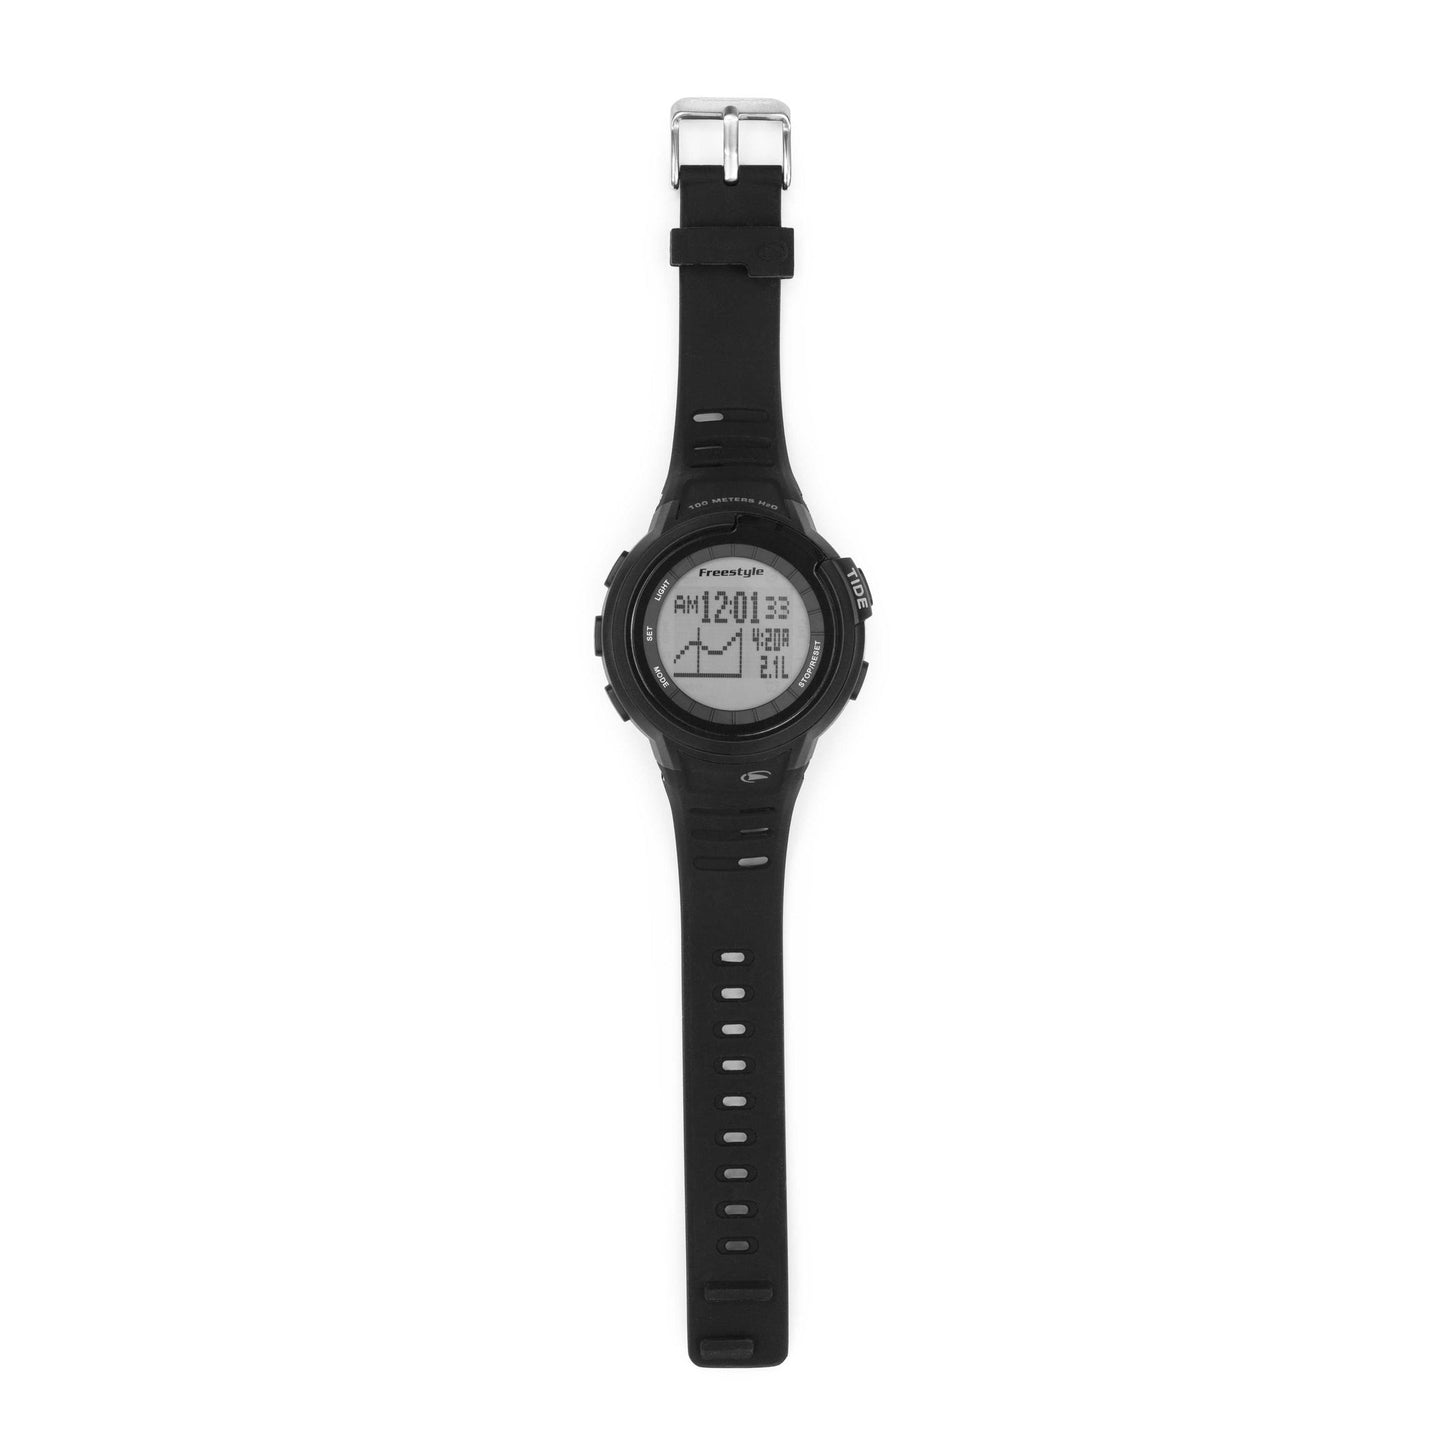 Freestyle Watches Mariner Tide 600 Tide Watch - Black (POS)